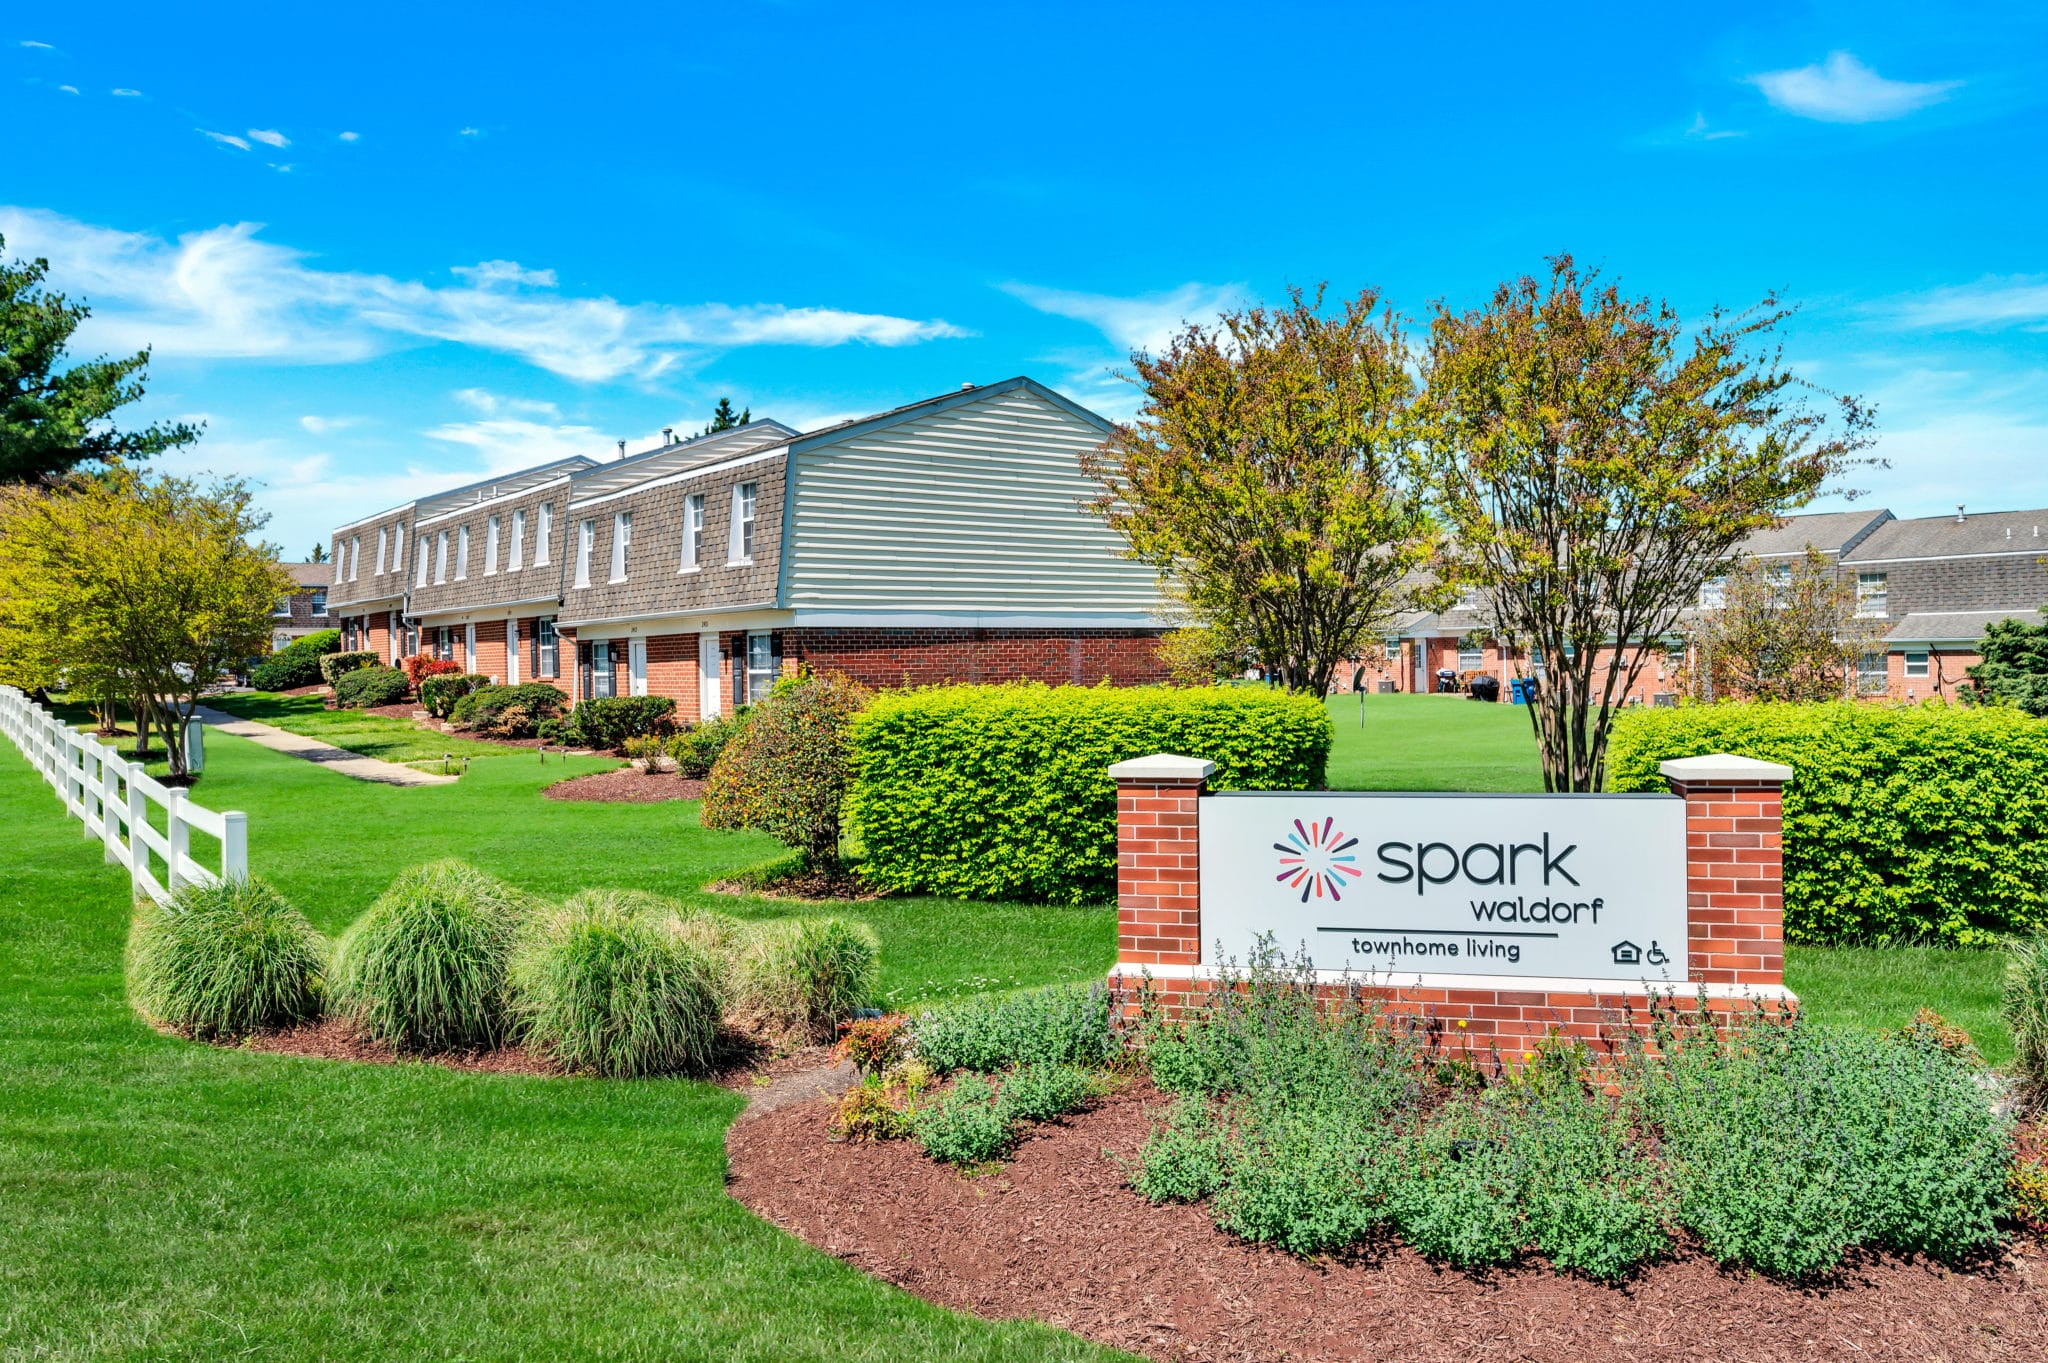 property sign | Spark Waldorf Apartments